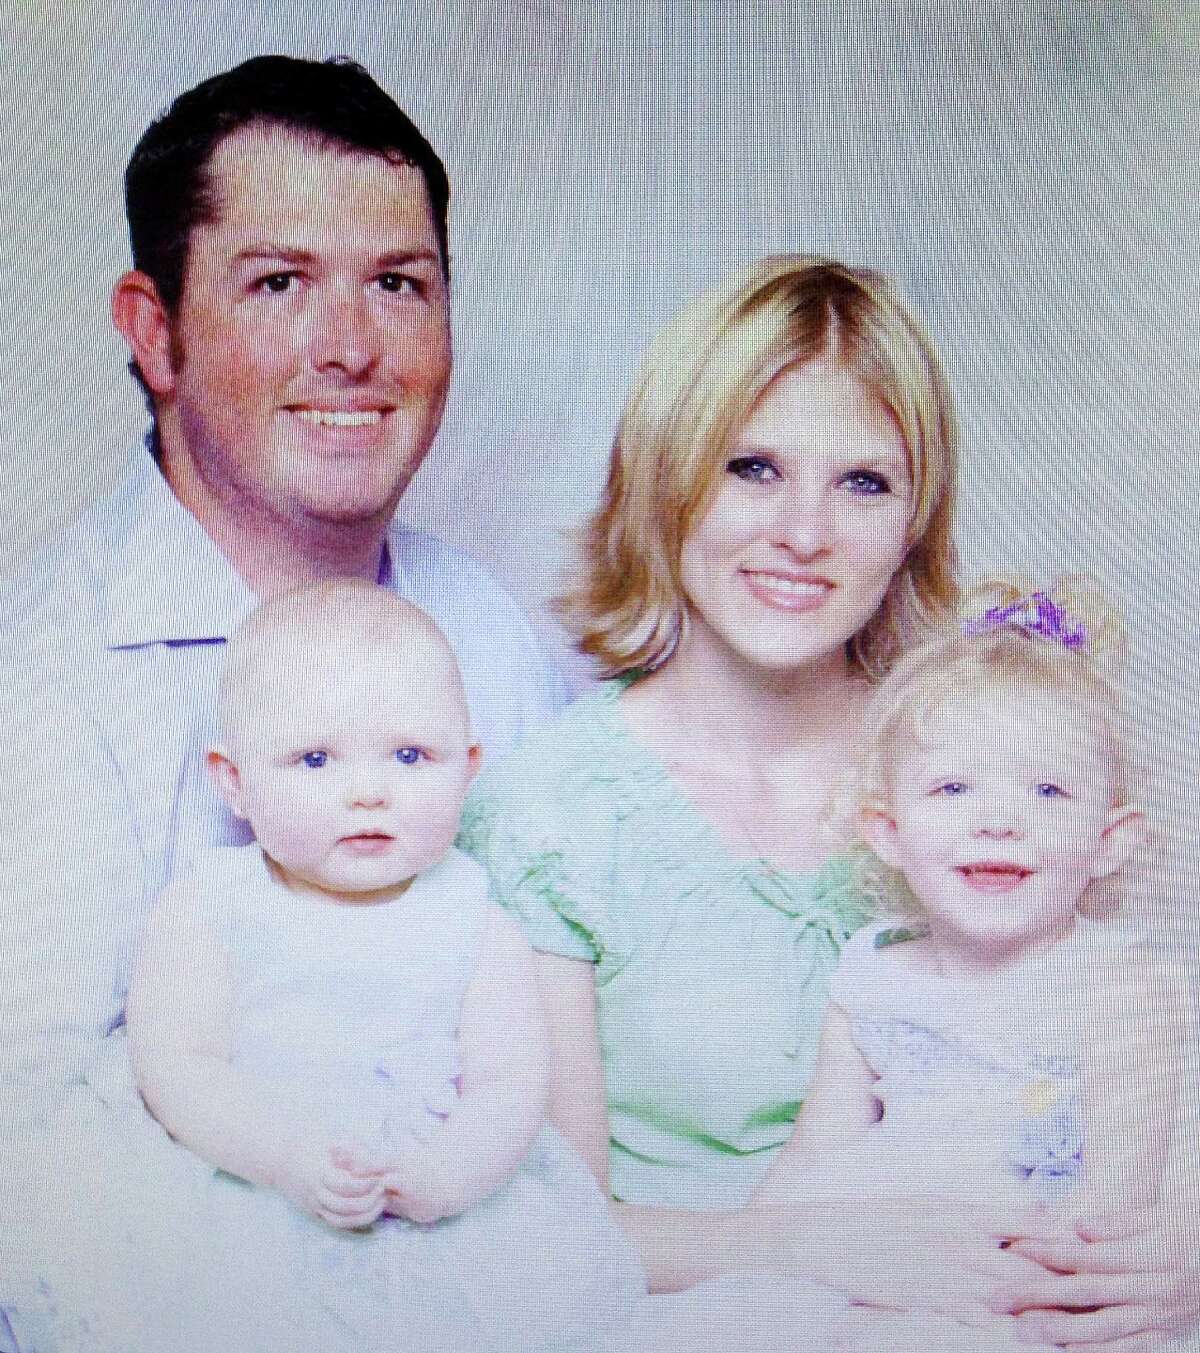 Tanner Hunt, top left, with his girlfriend and two daughters in a family portrait from 2006 that is part of the probate case file.